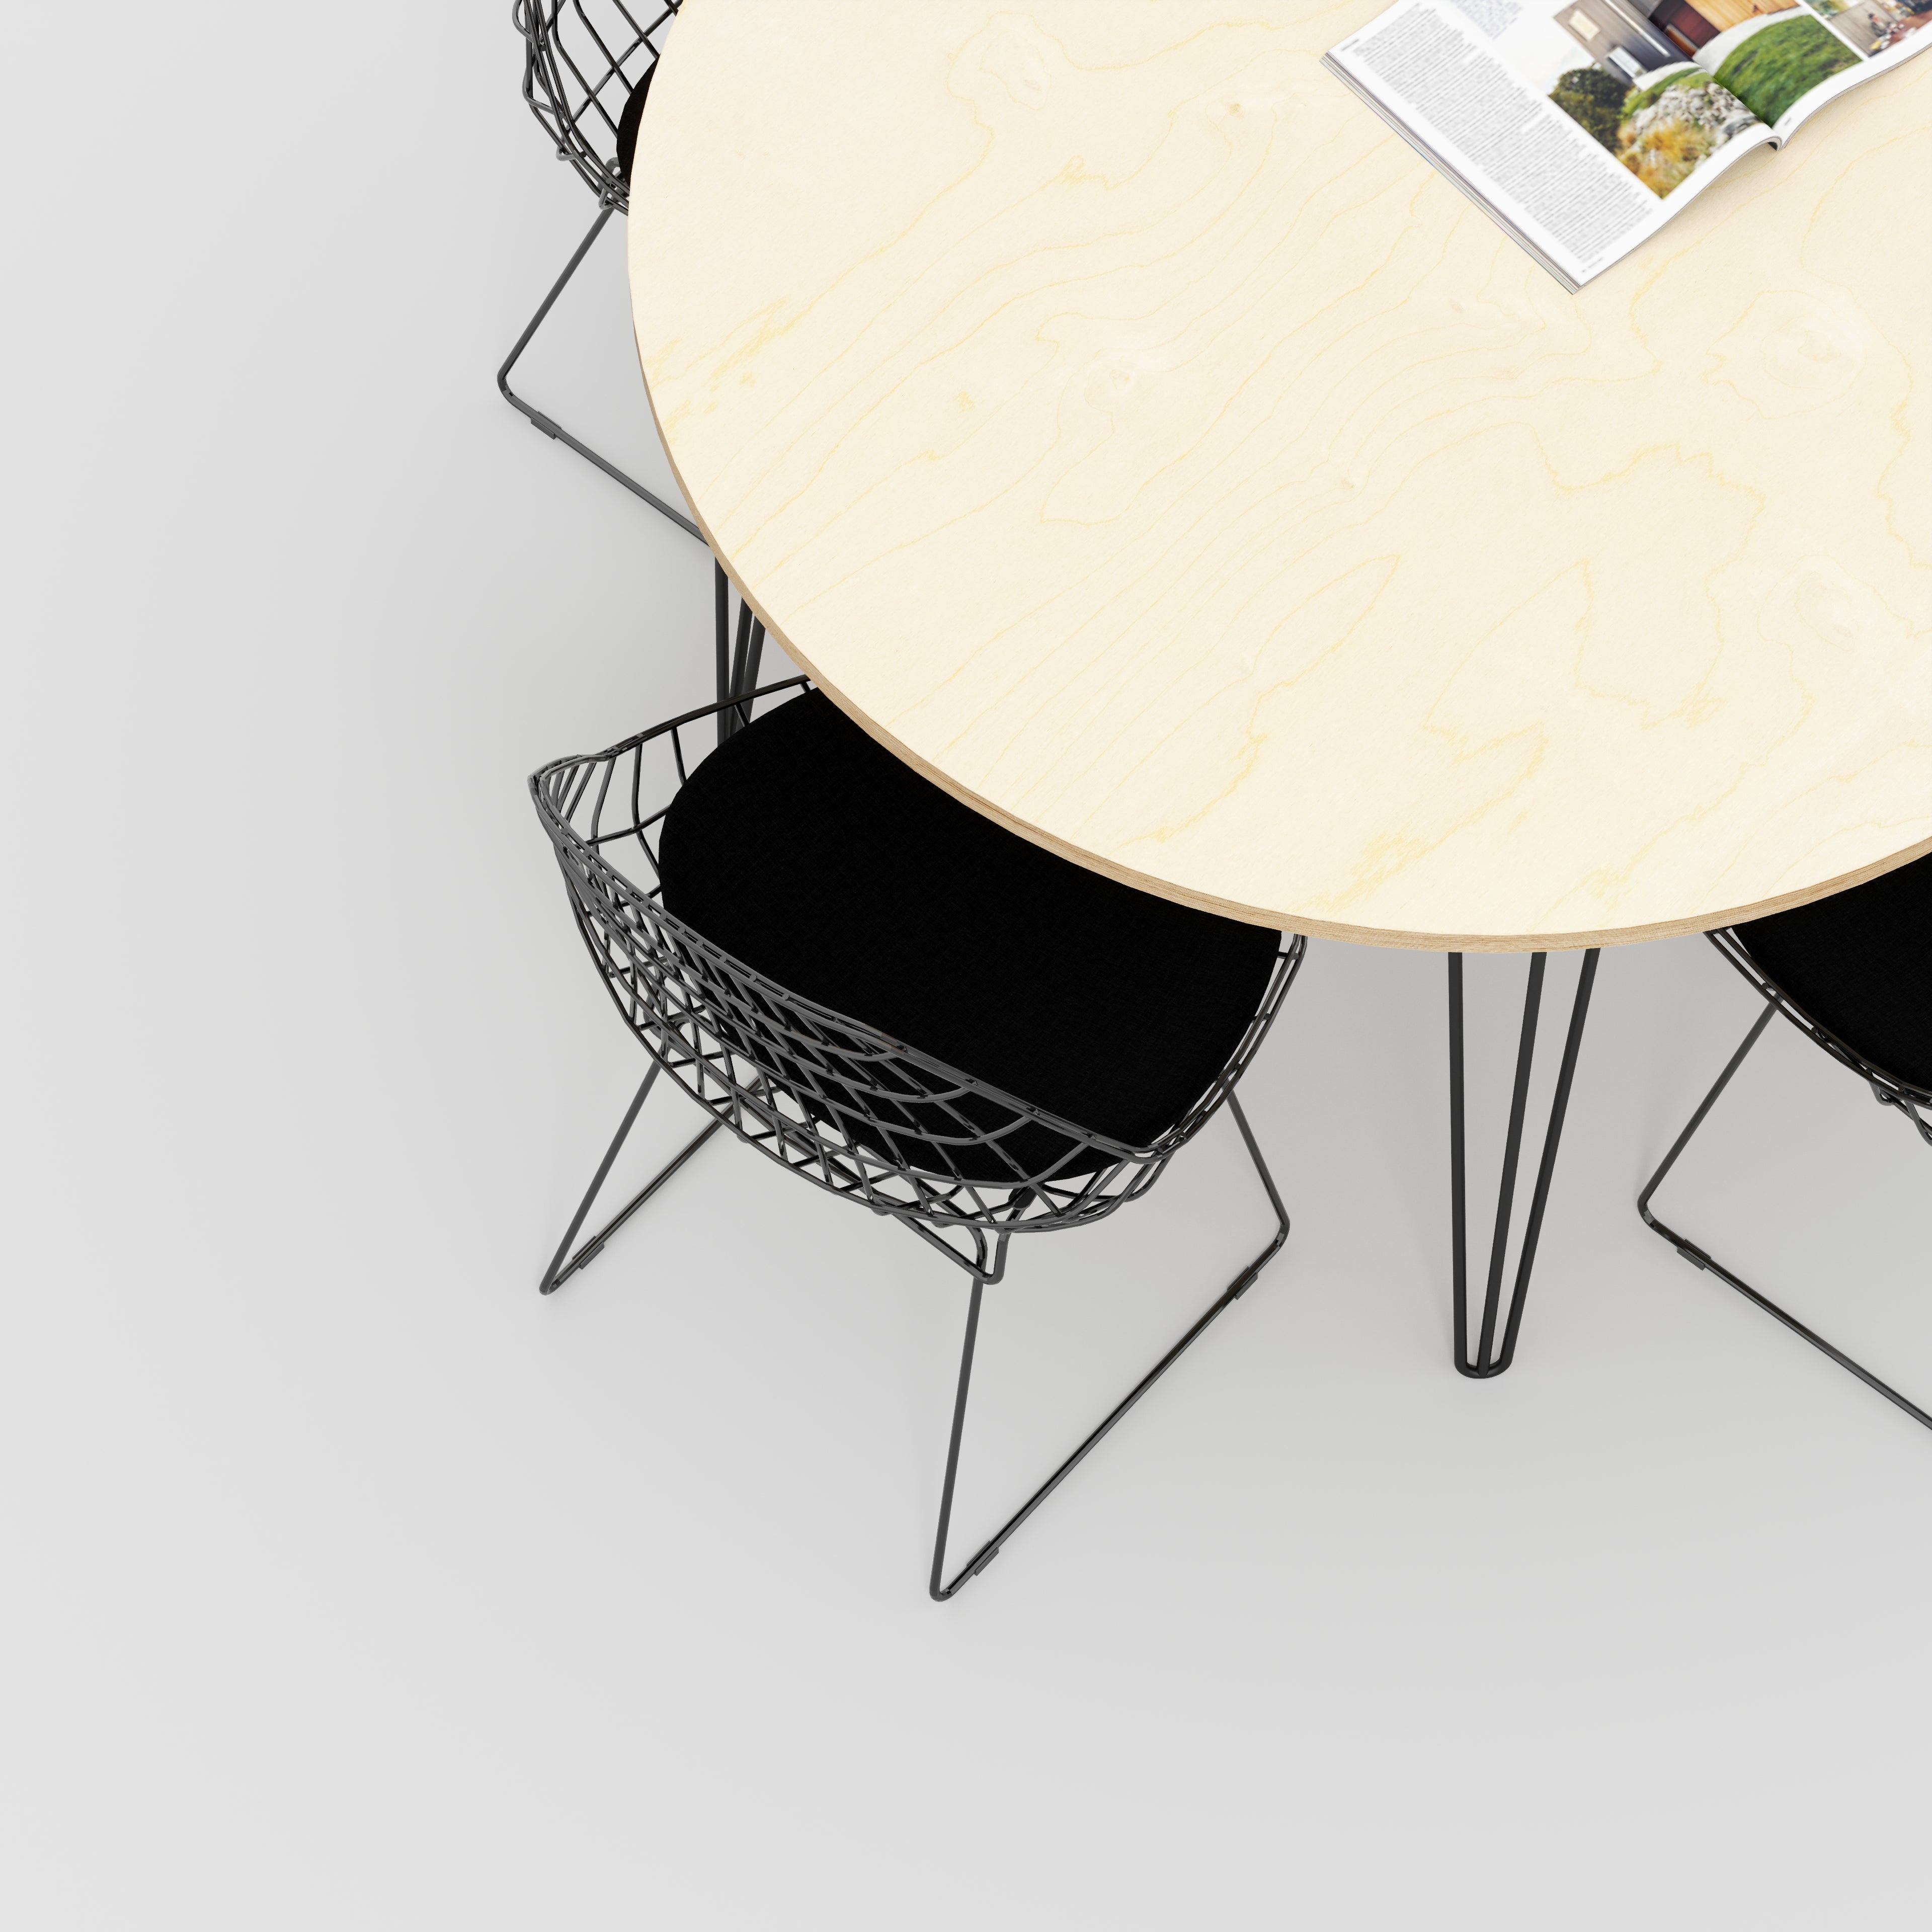 Round Table with Black Hairpin Legs - Plywood Birch - 1200(dia) x 735(h)